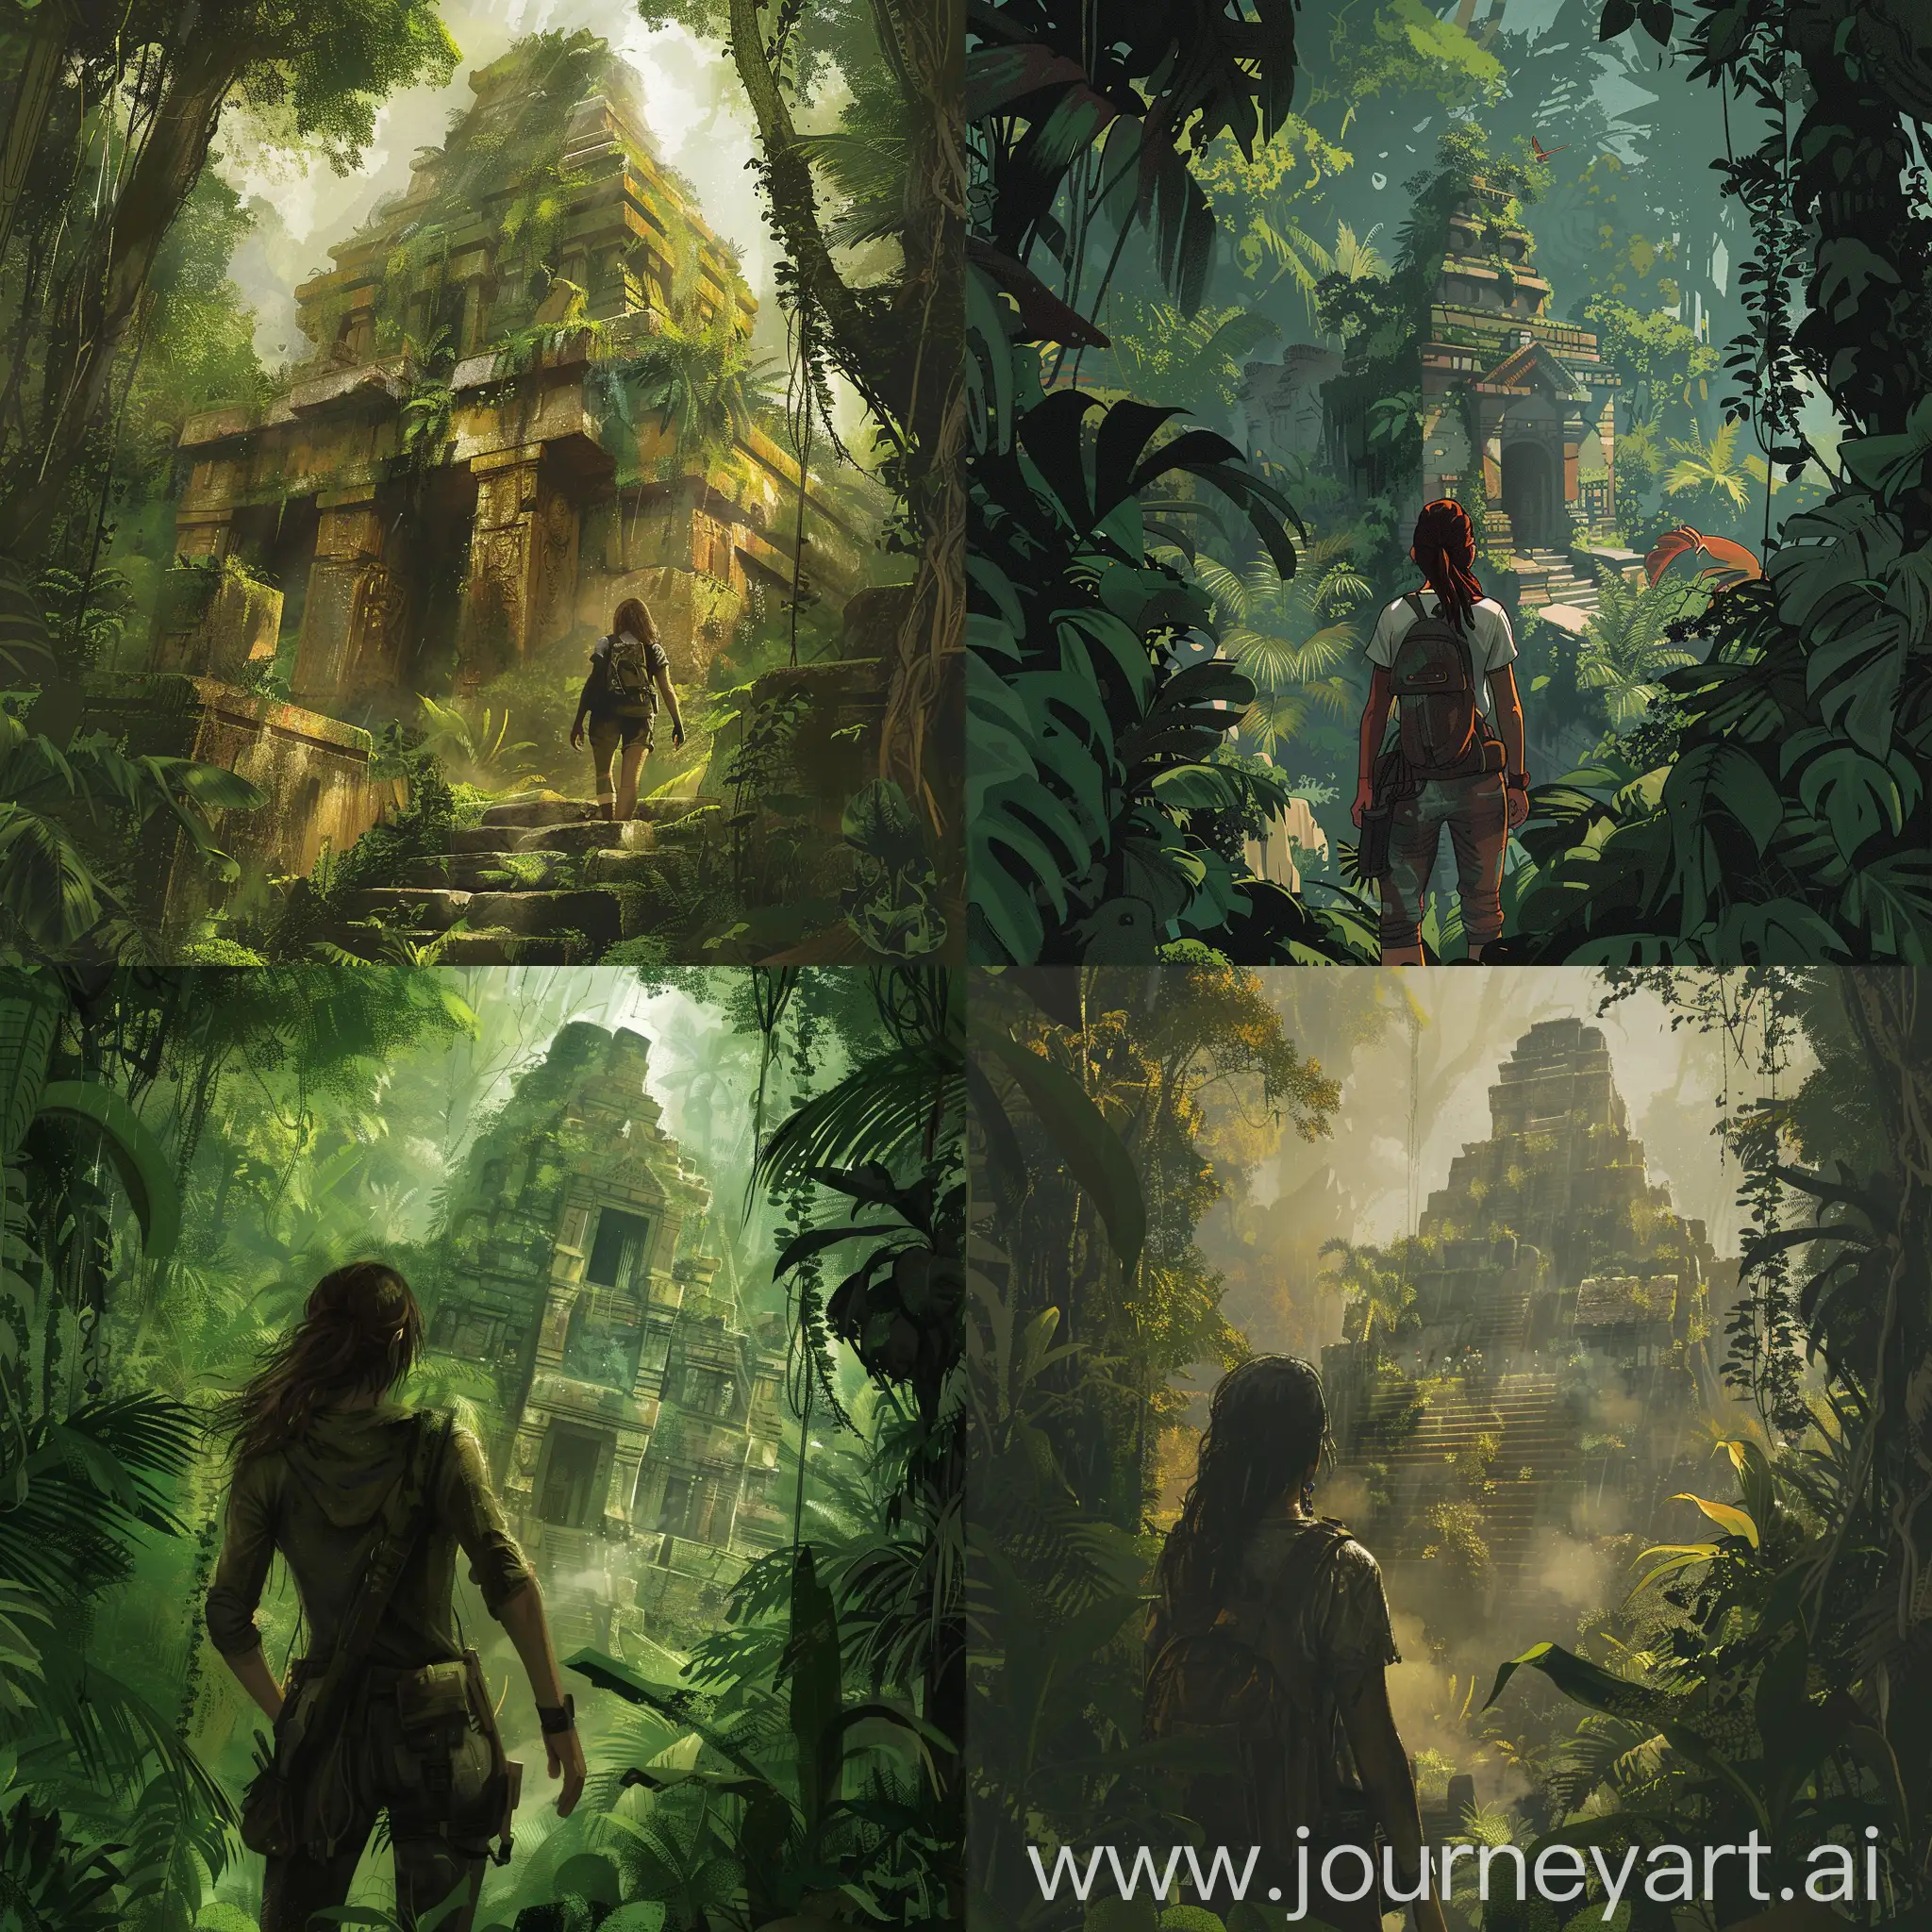 Amelia, a skilled archaeologist, finds herself deep within the heart of the Amazon rainforest. She's been on an expedition for weeks, searching for a long-lost ancient civilization rumored to hold the key to a mysterious power. As she delves further into the dense foliage, she stumbles upon an overgrown temple hidden from modern eyes for centuries. The air is thick with anticipation as she realizes she's reached the midpoint of her journey. Write about the challenges she faces, the discoveries she makes, and the unforeseen alliances or conflicts that arise during this critical phase of her expedition.